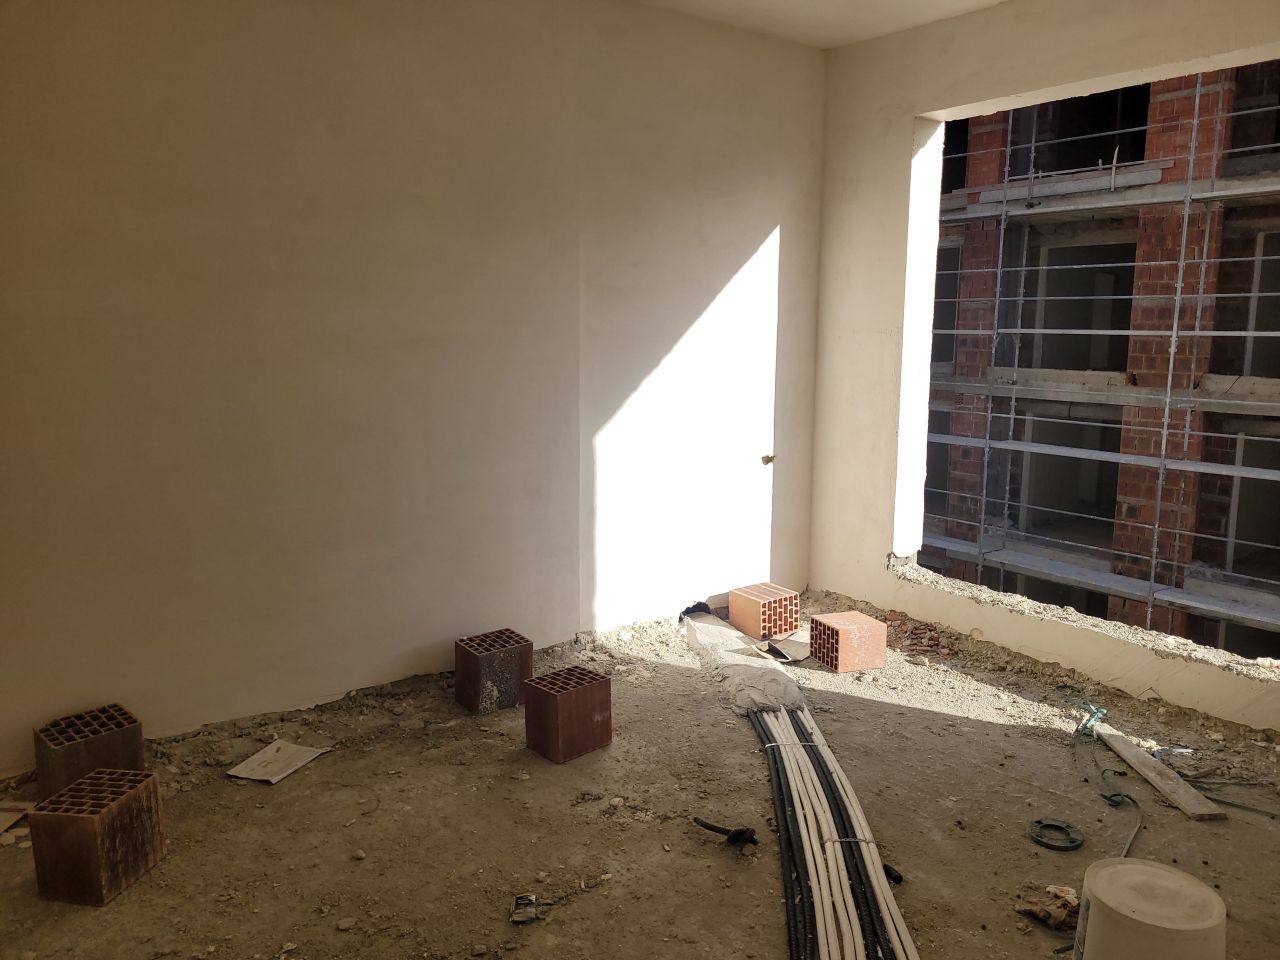 Apartment For Sale In Golem Durres Albania, In A New Building Under Construction, Close To The Beach